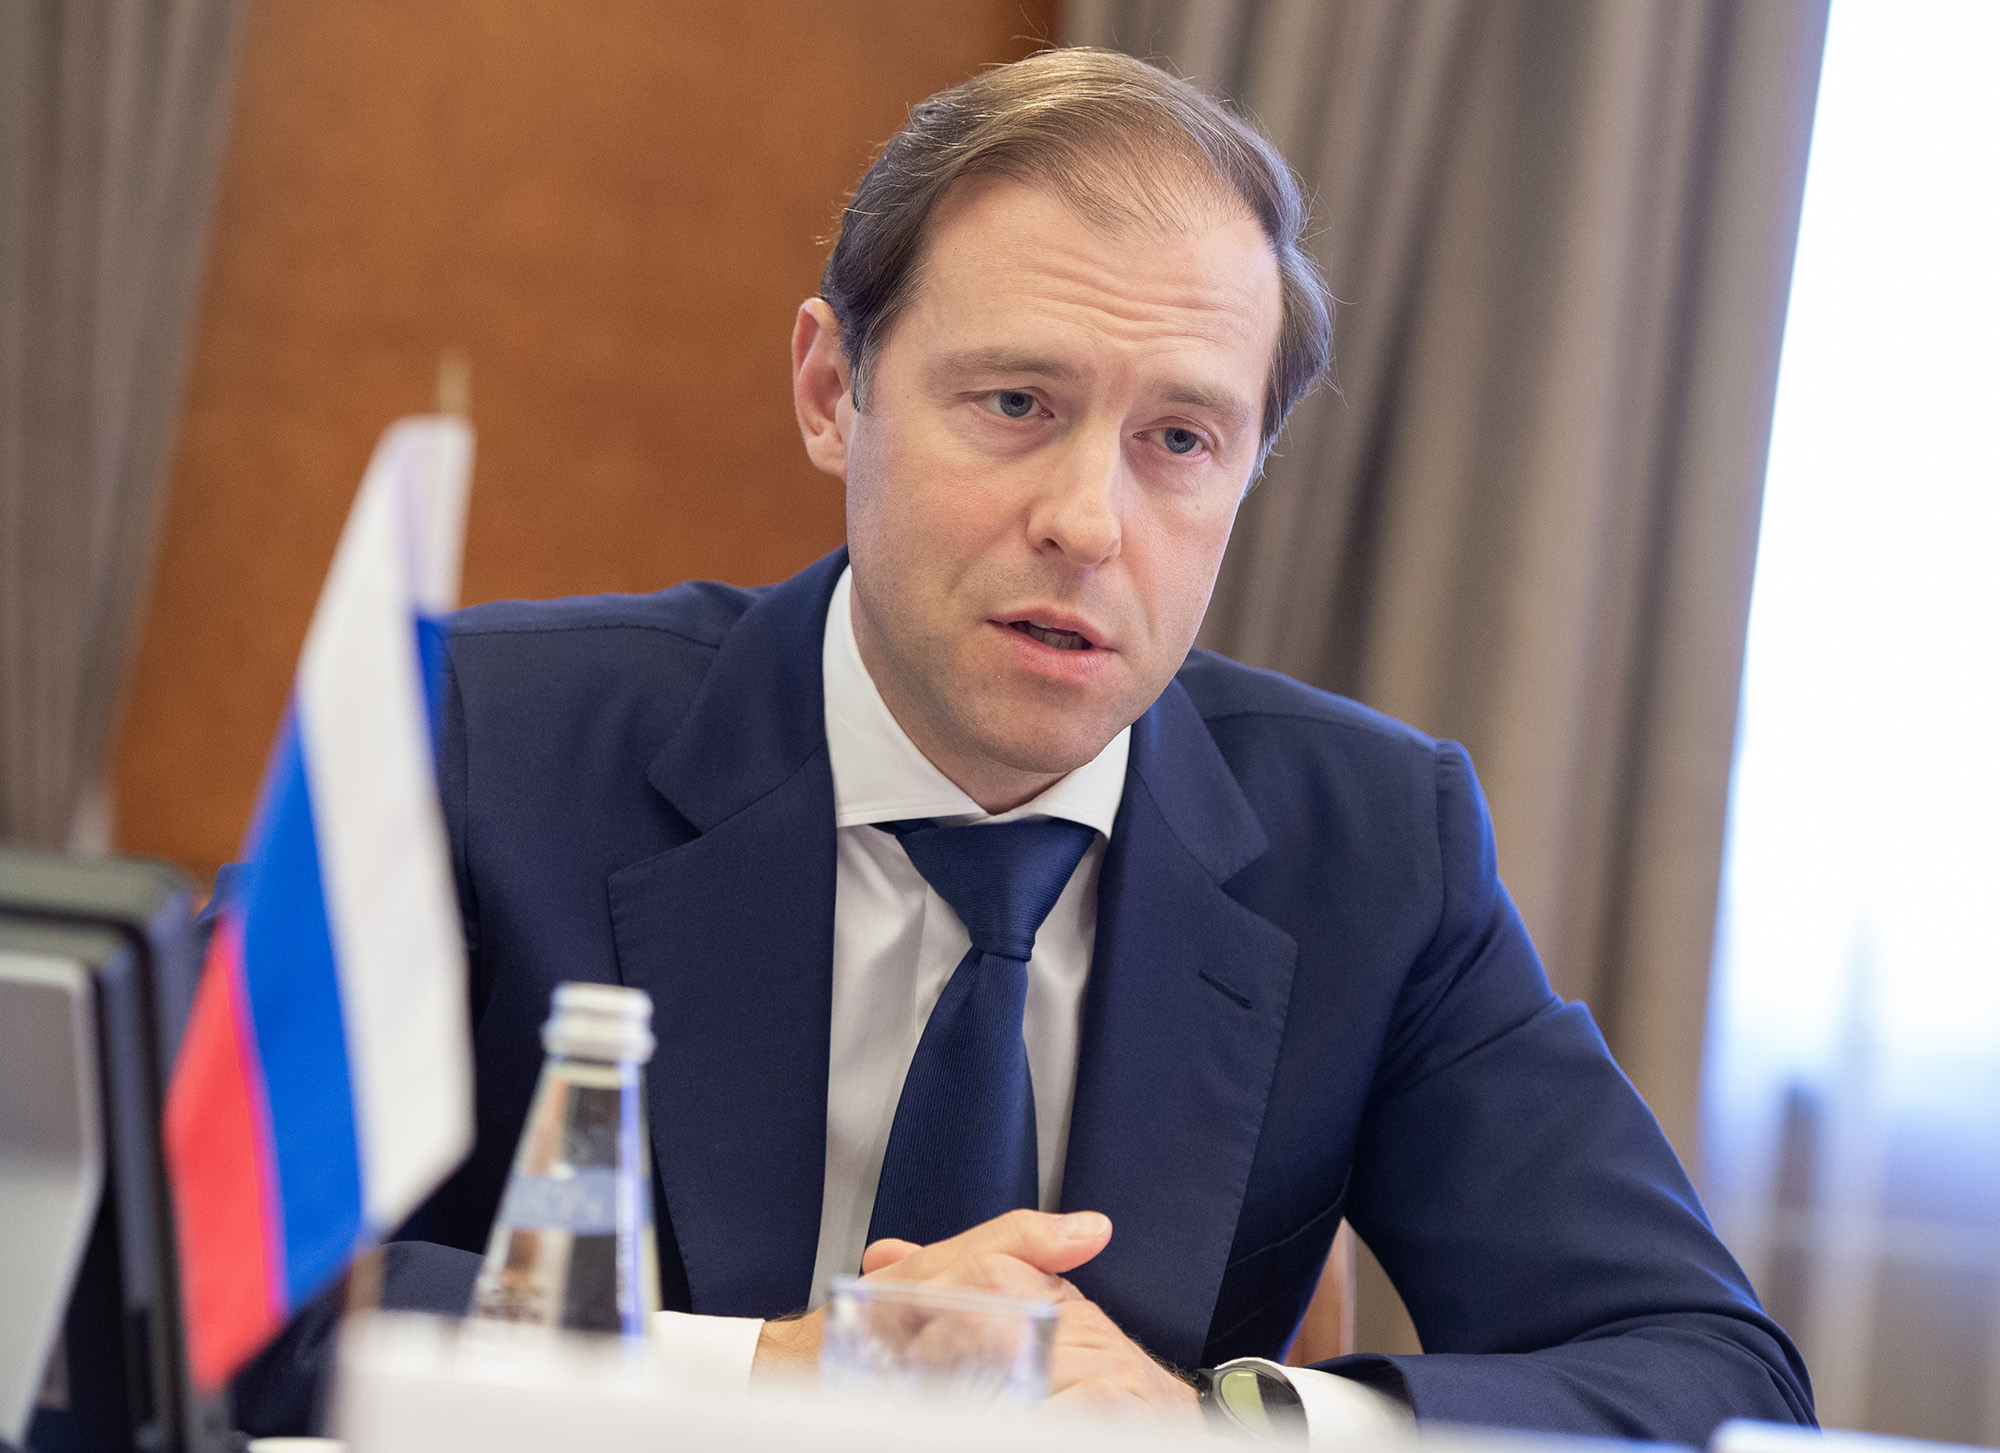 Russian Minister of Industry Denis Manturov meets with his German counterpart in Moscow, Russia, on May 14, 2018. He has now been sanctioned by the UK government.